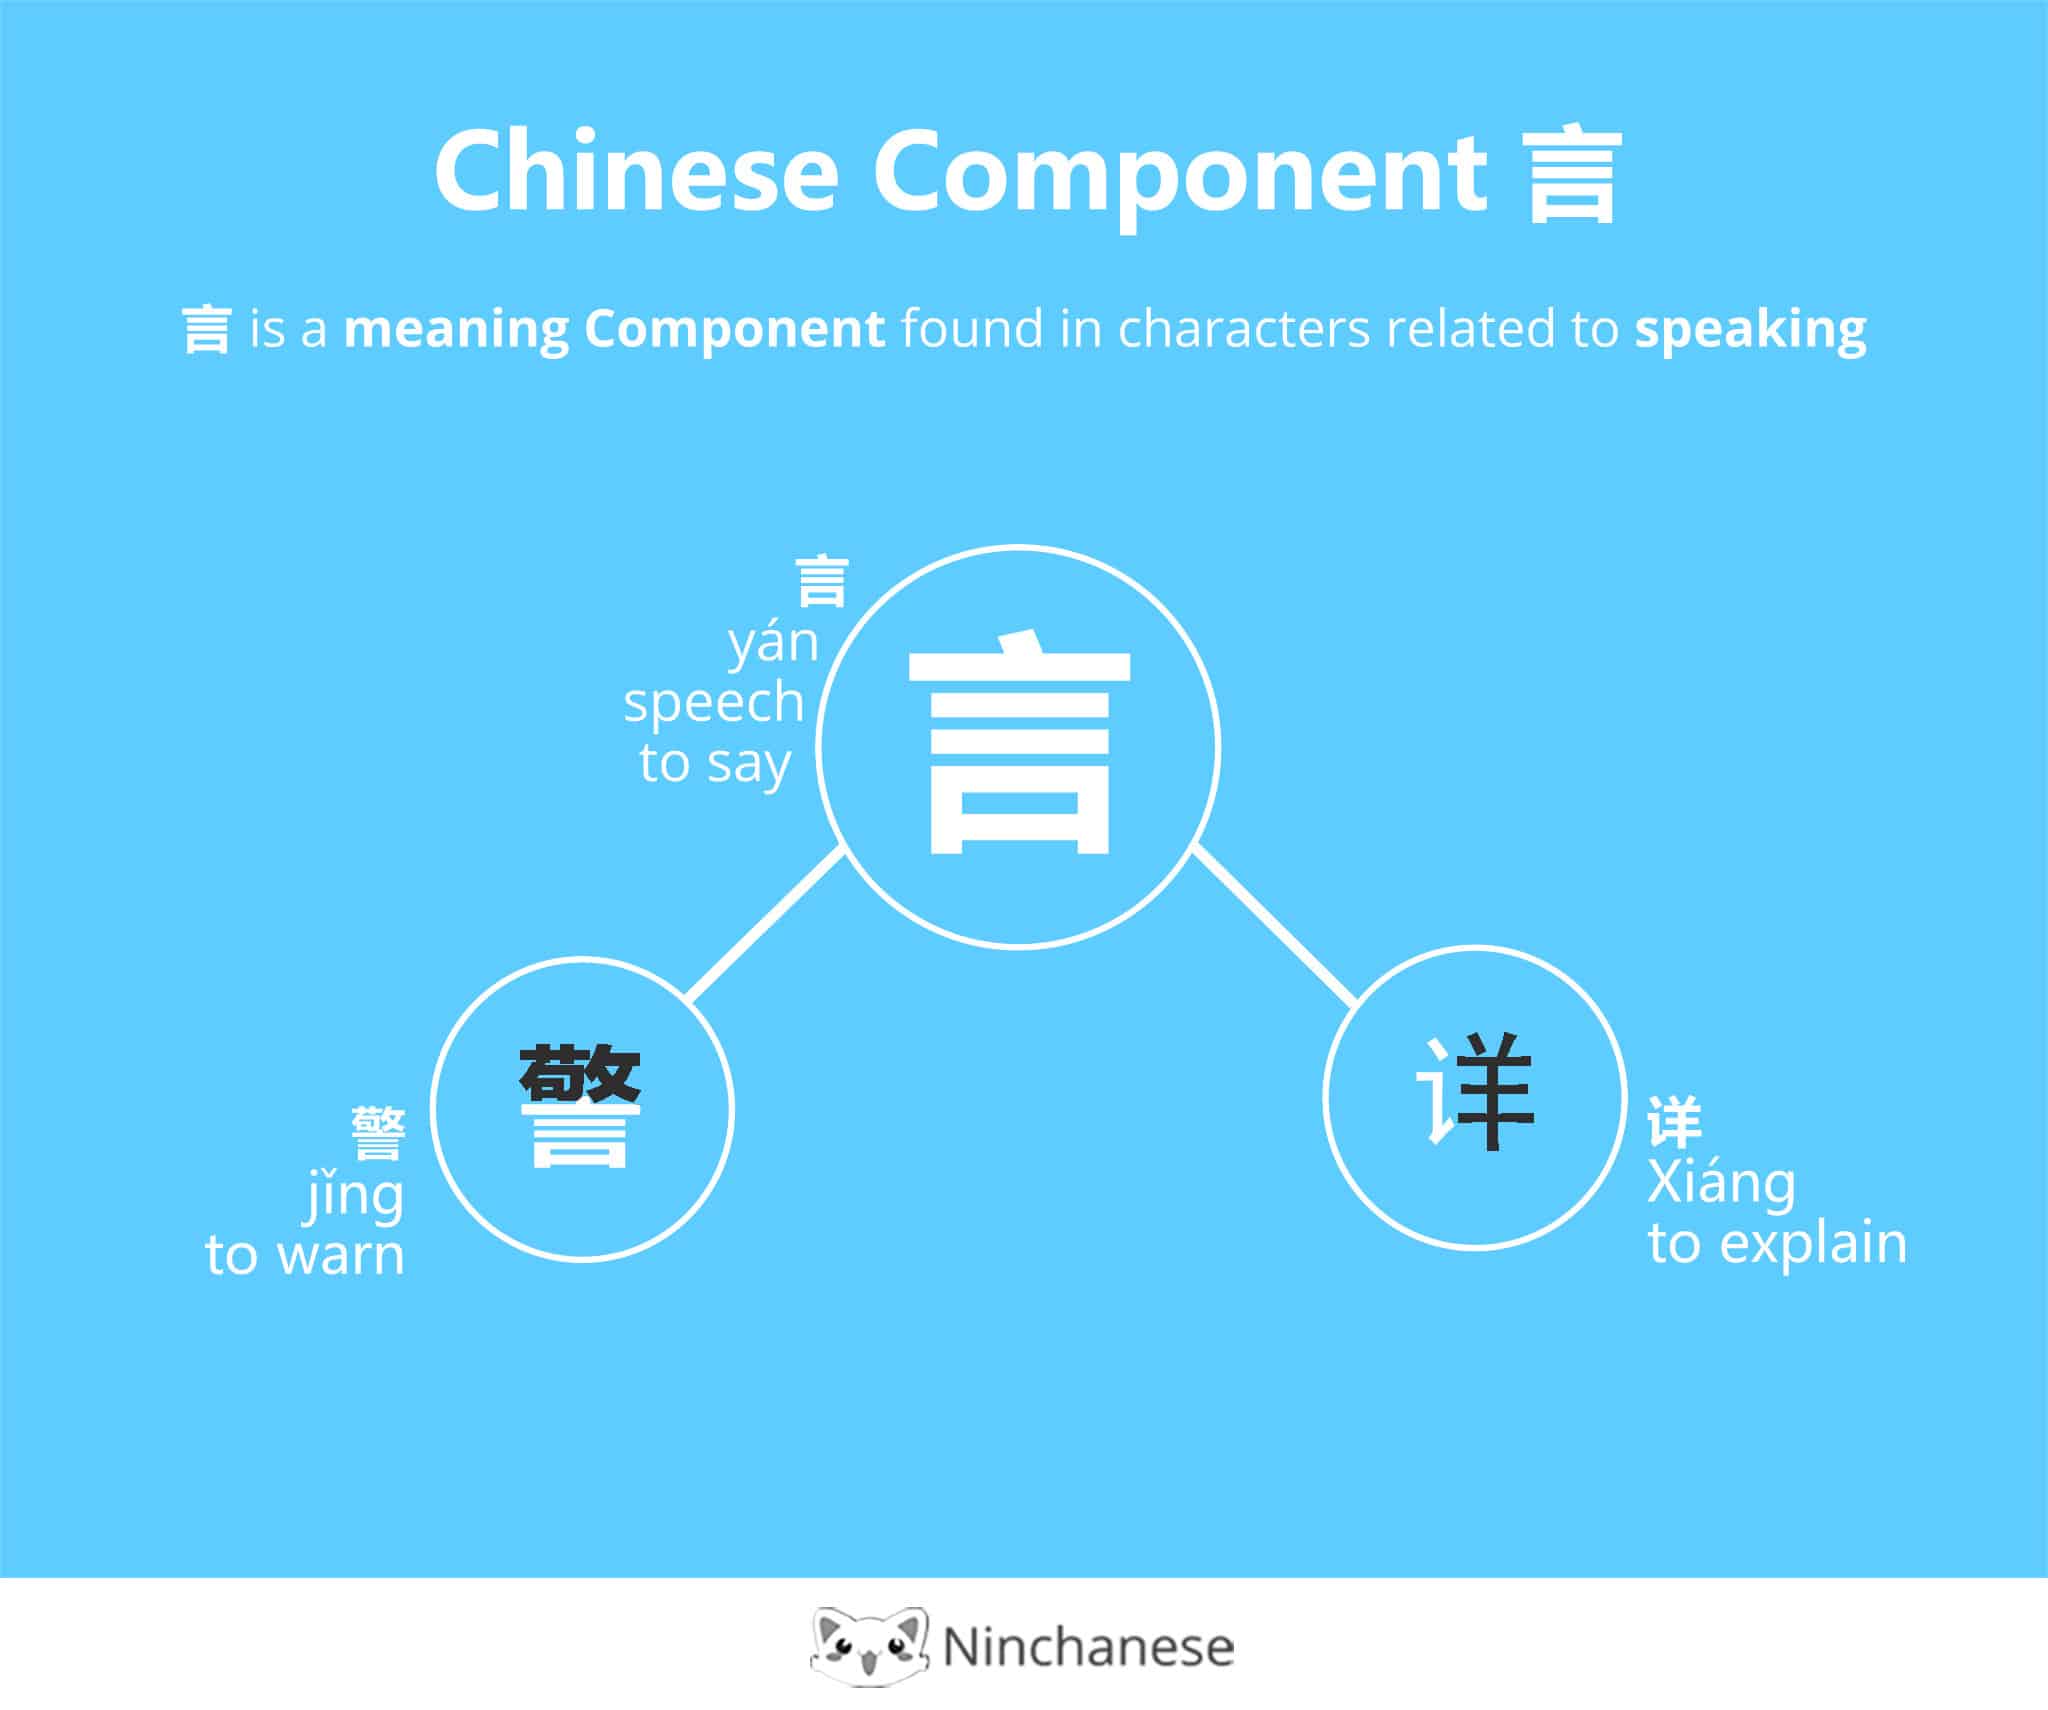 keynote speech meaning in chinese